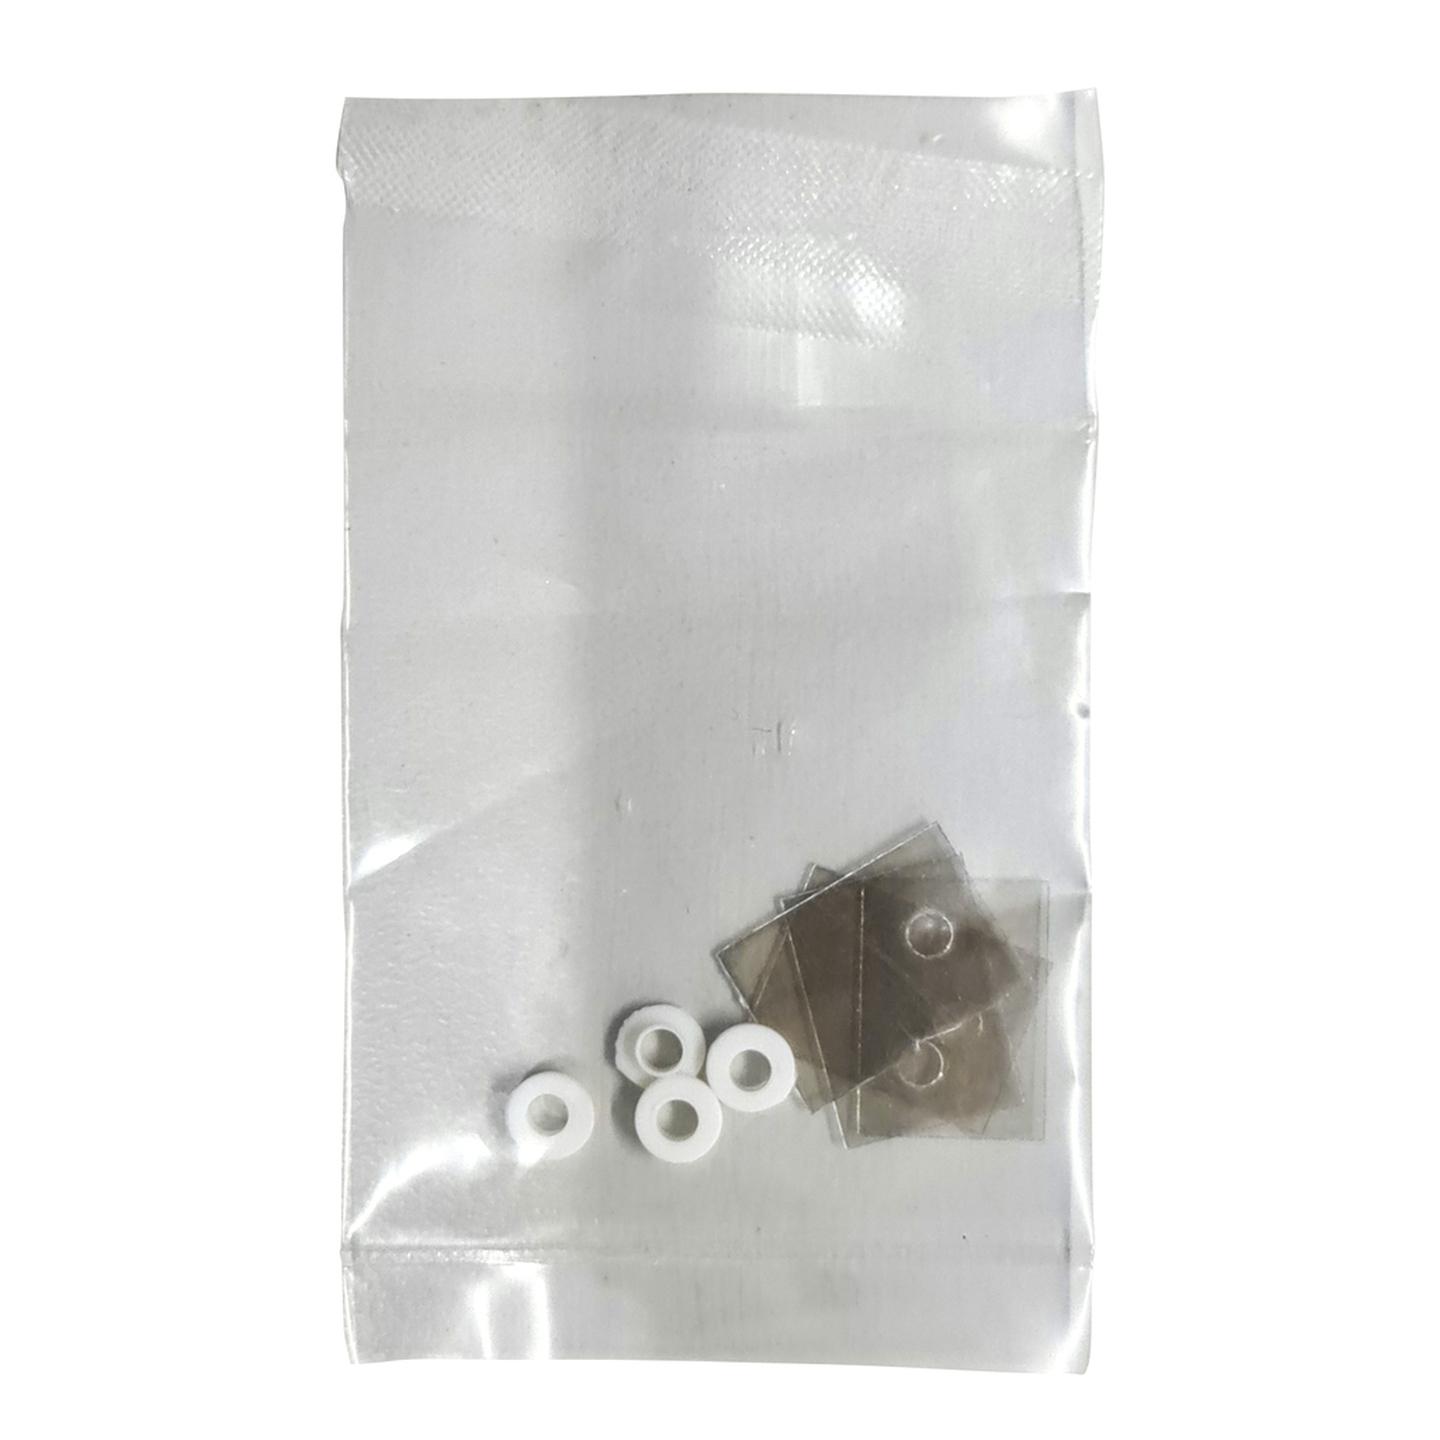 TO-220 Mica Transistor Insulating Kit - Pack of 4